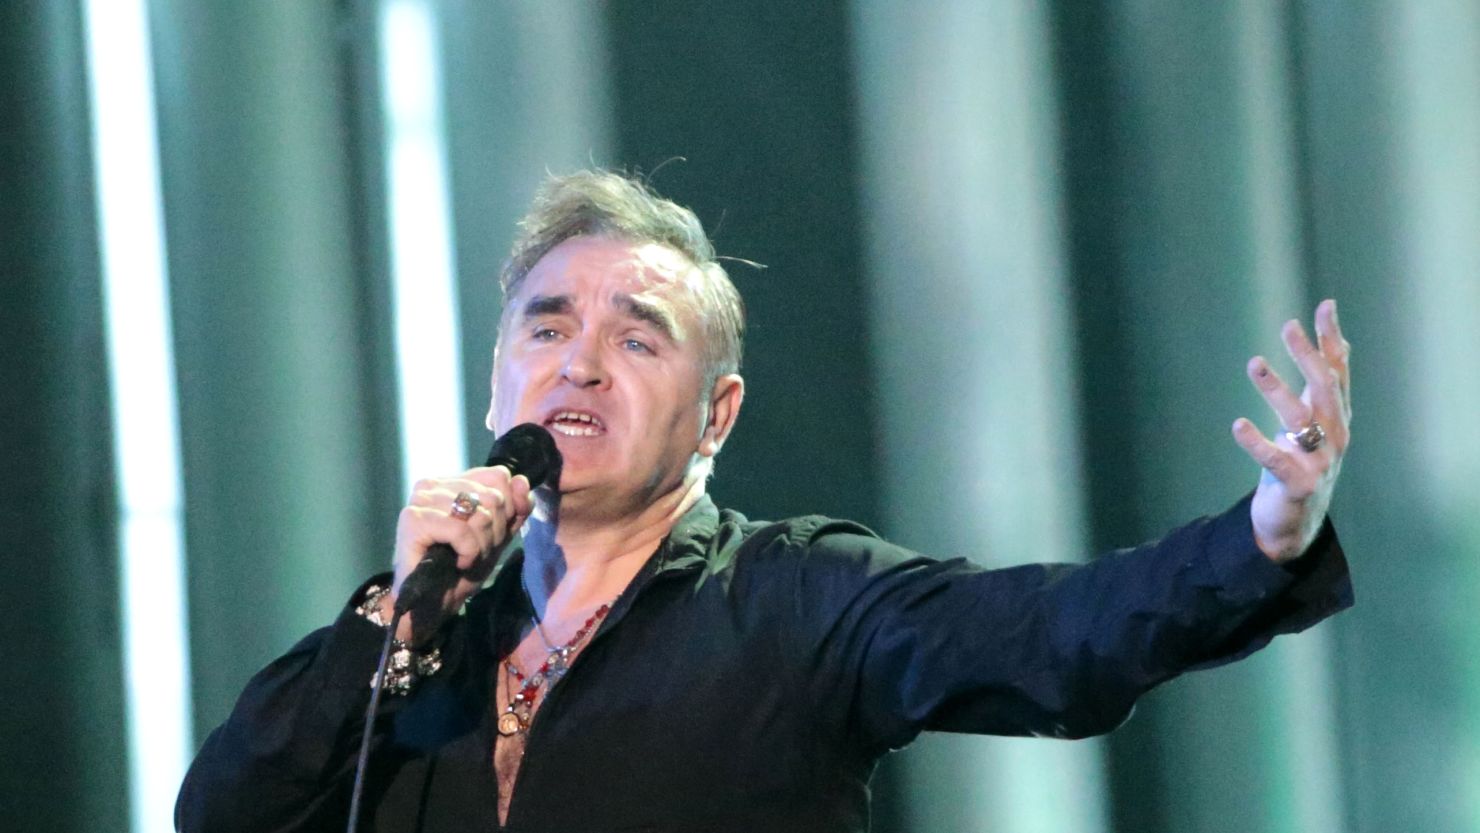 Morrissey wrote about "one giggling snowball of full-figured copulation," in his debut novel